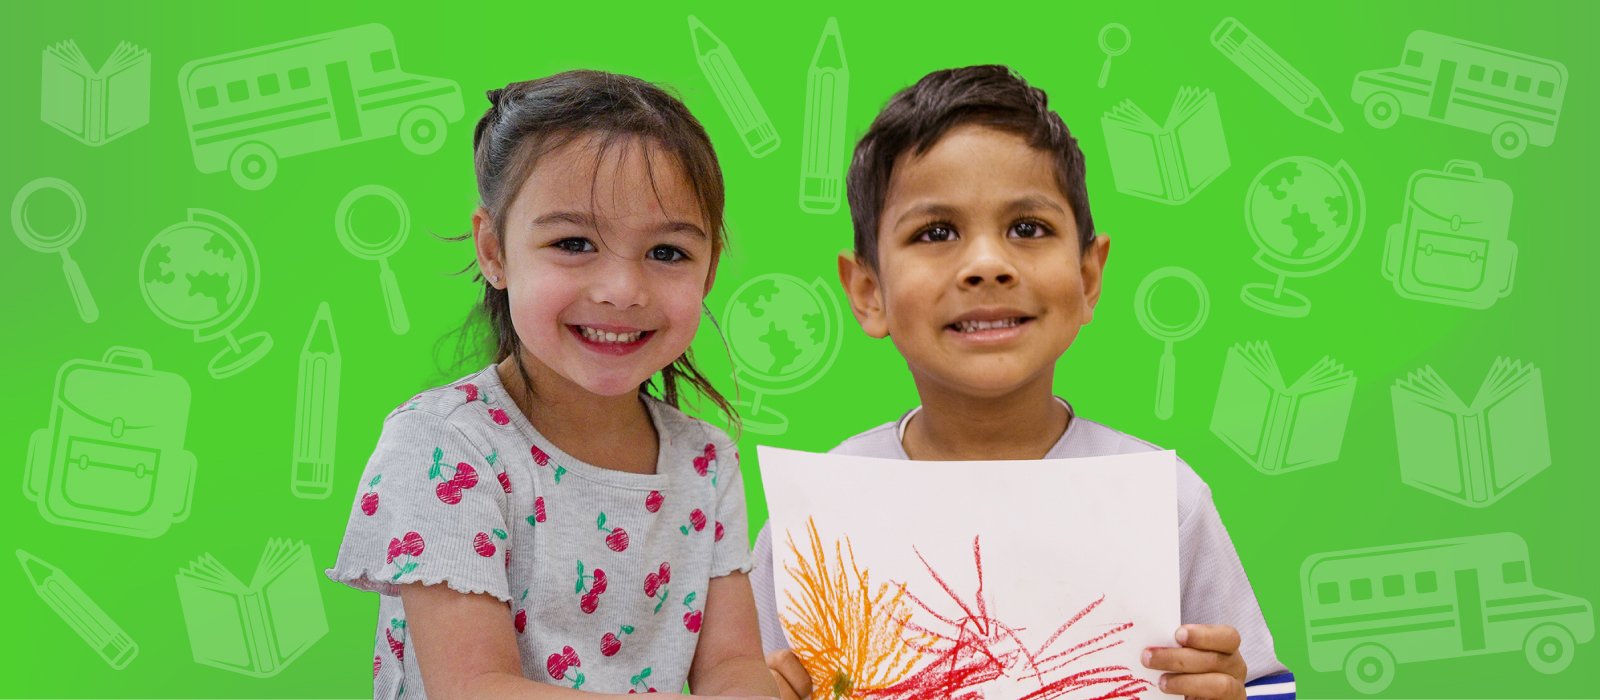 Two smiling Kindergarten students on green background 